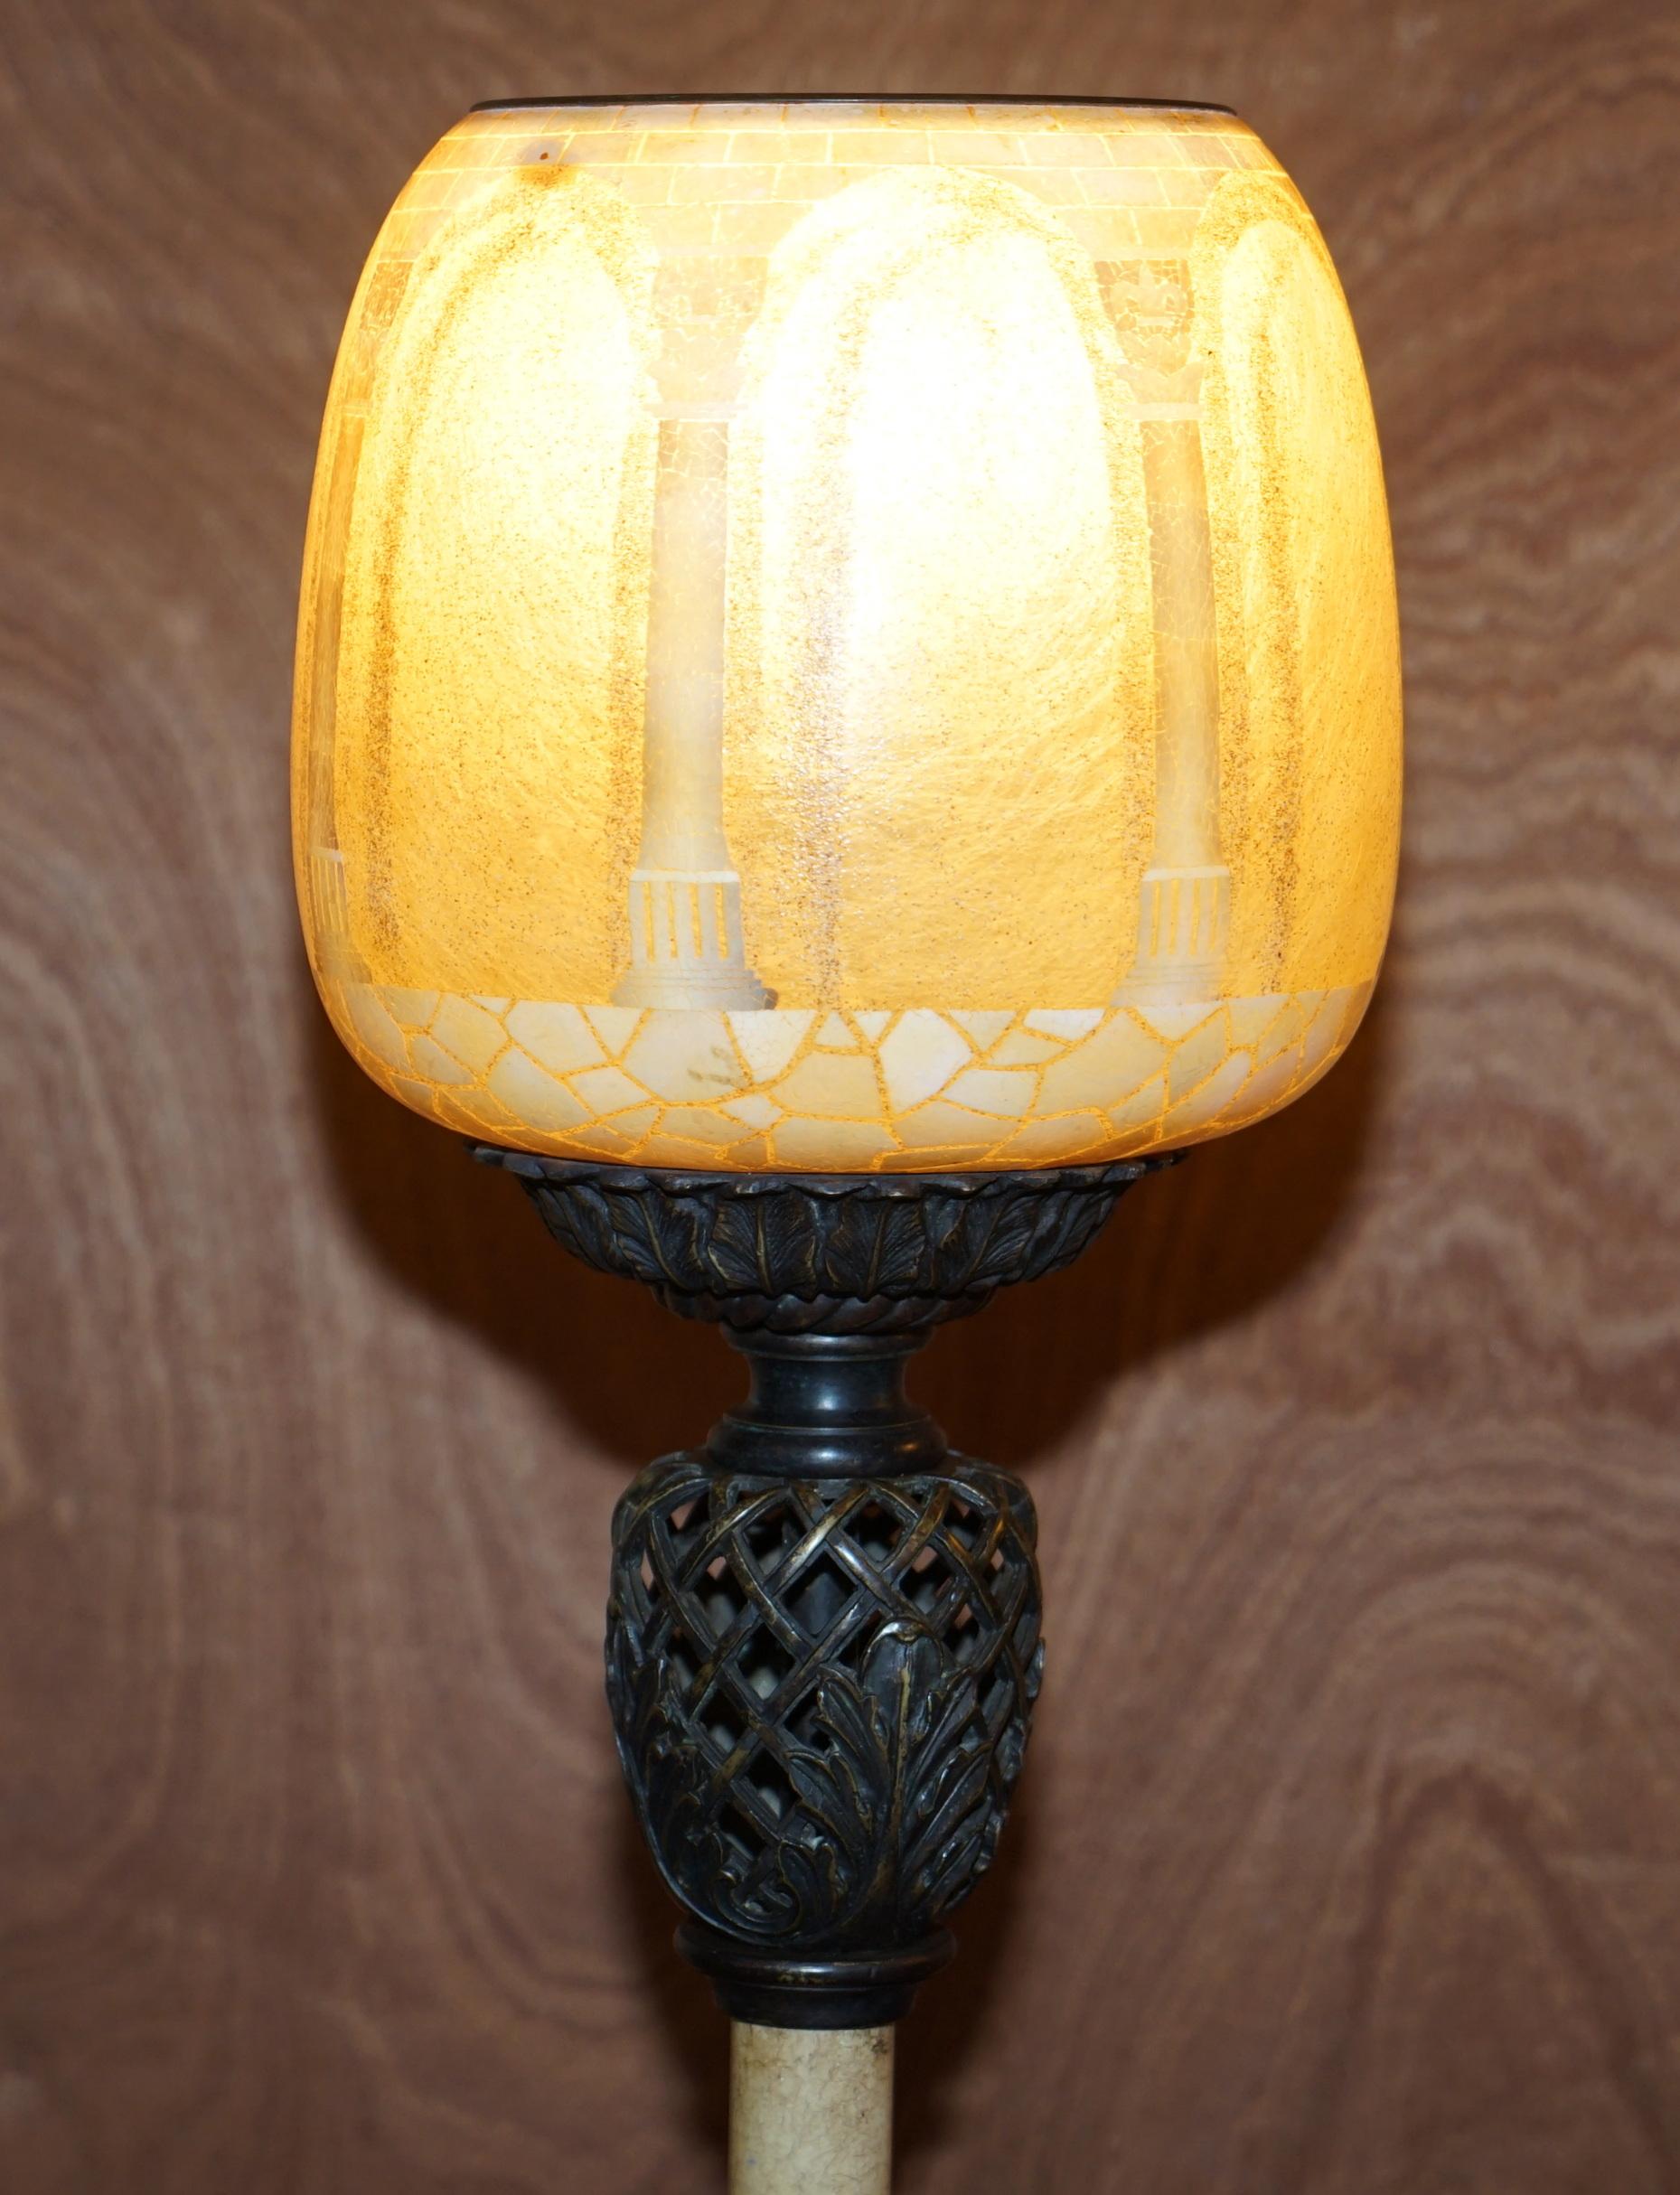 Exquisite Pair of Large Vintage Table Lamps with Corinthian Roman Pillar Shades For Sale 10